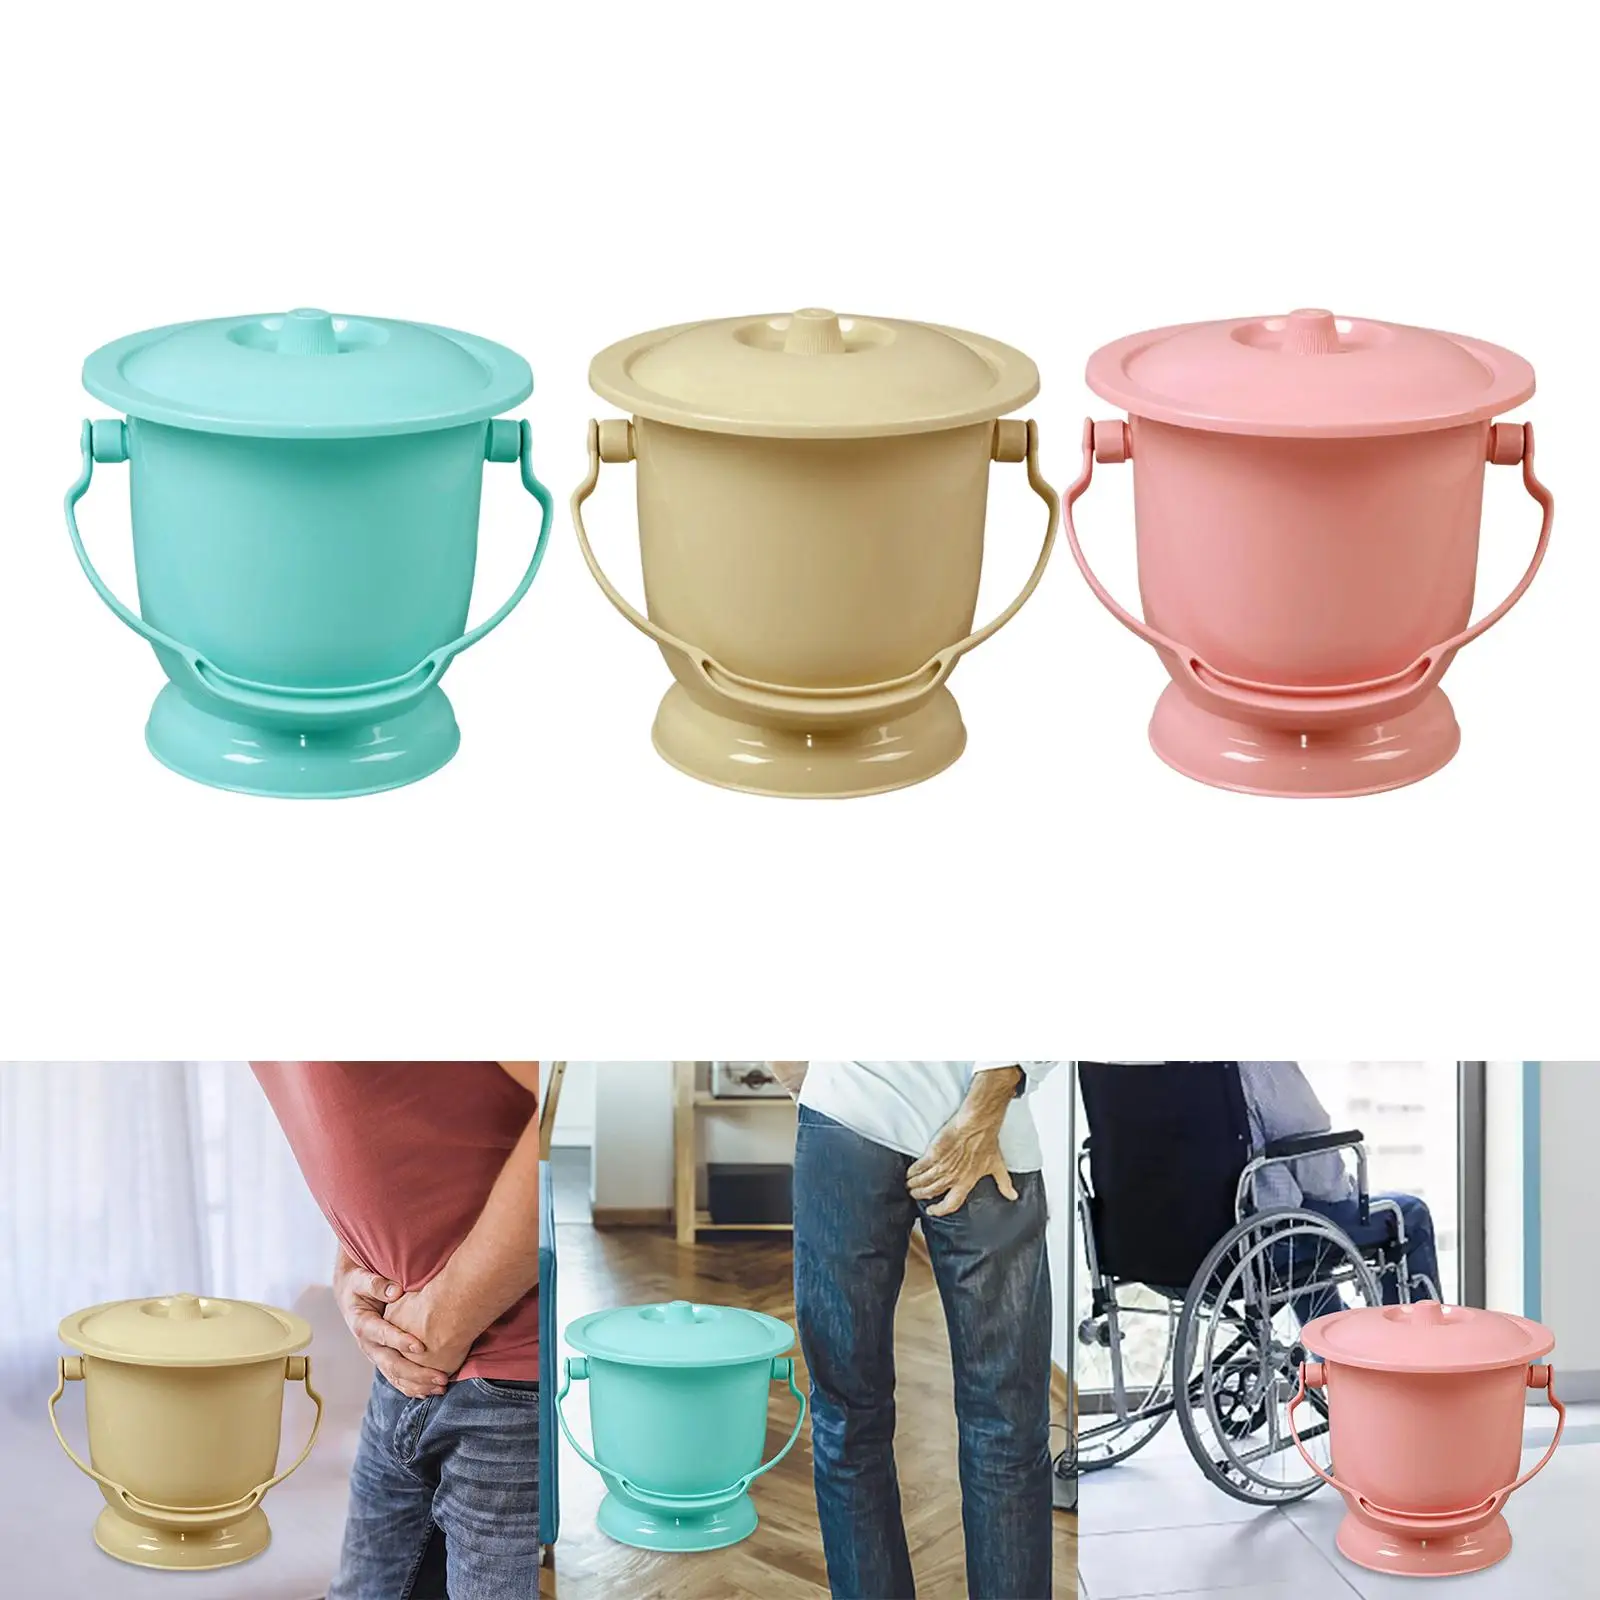 Chamber Pot with Lid Spittoon Bedpan Children Adults Indoor Practical PP Plastic Night Pot Pee Potty Mini Toilets Urinal Bottle